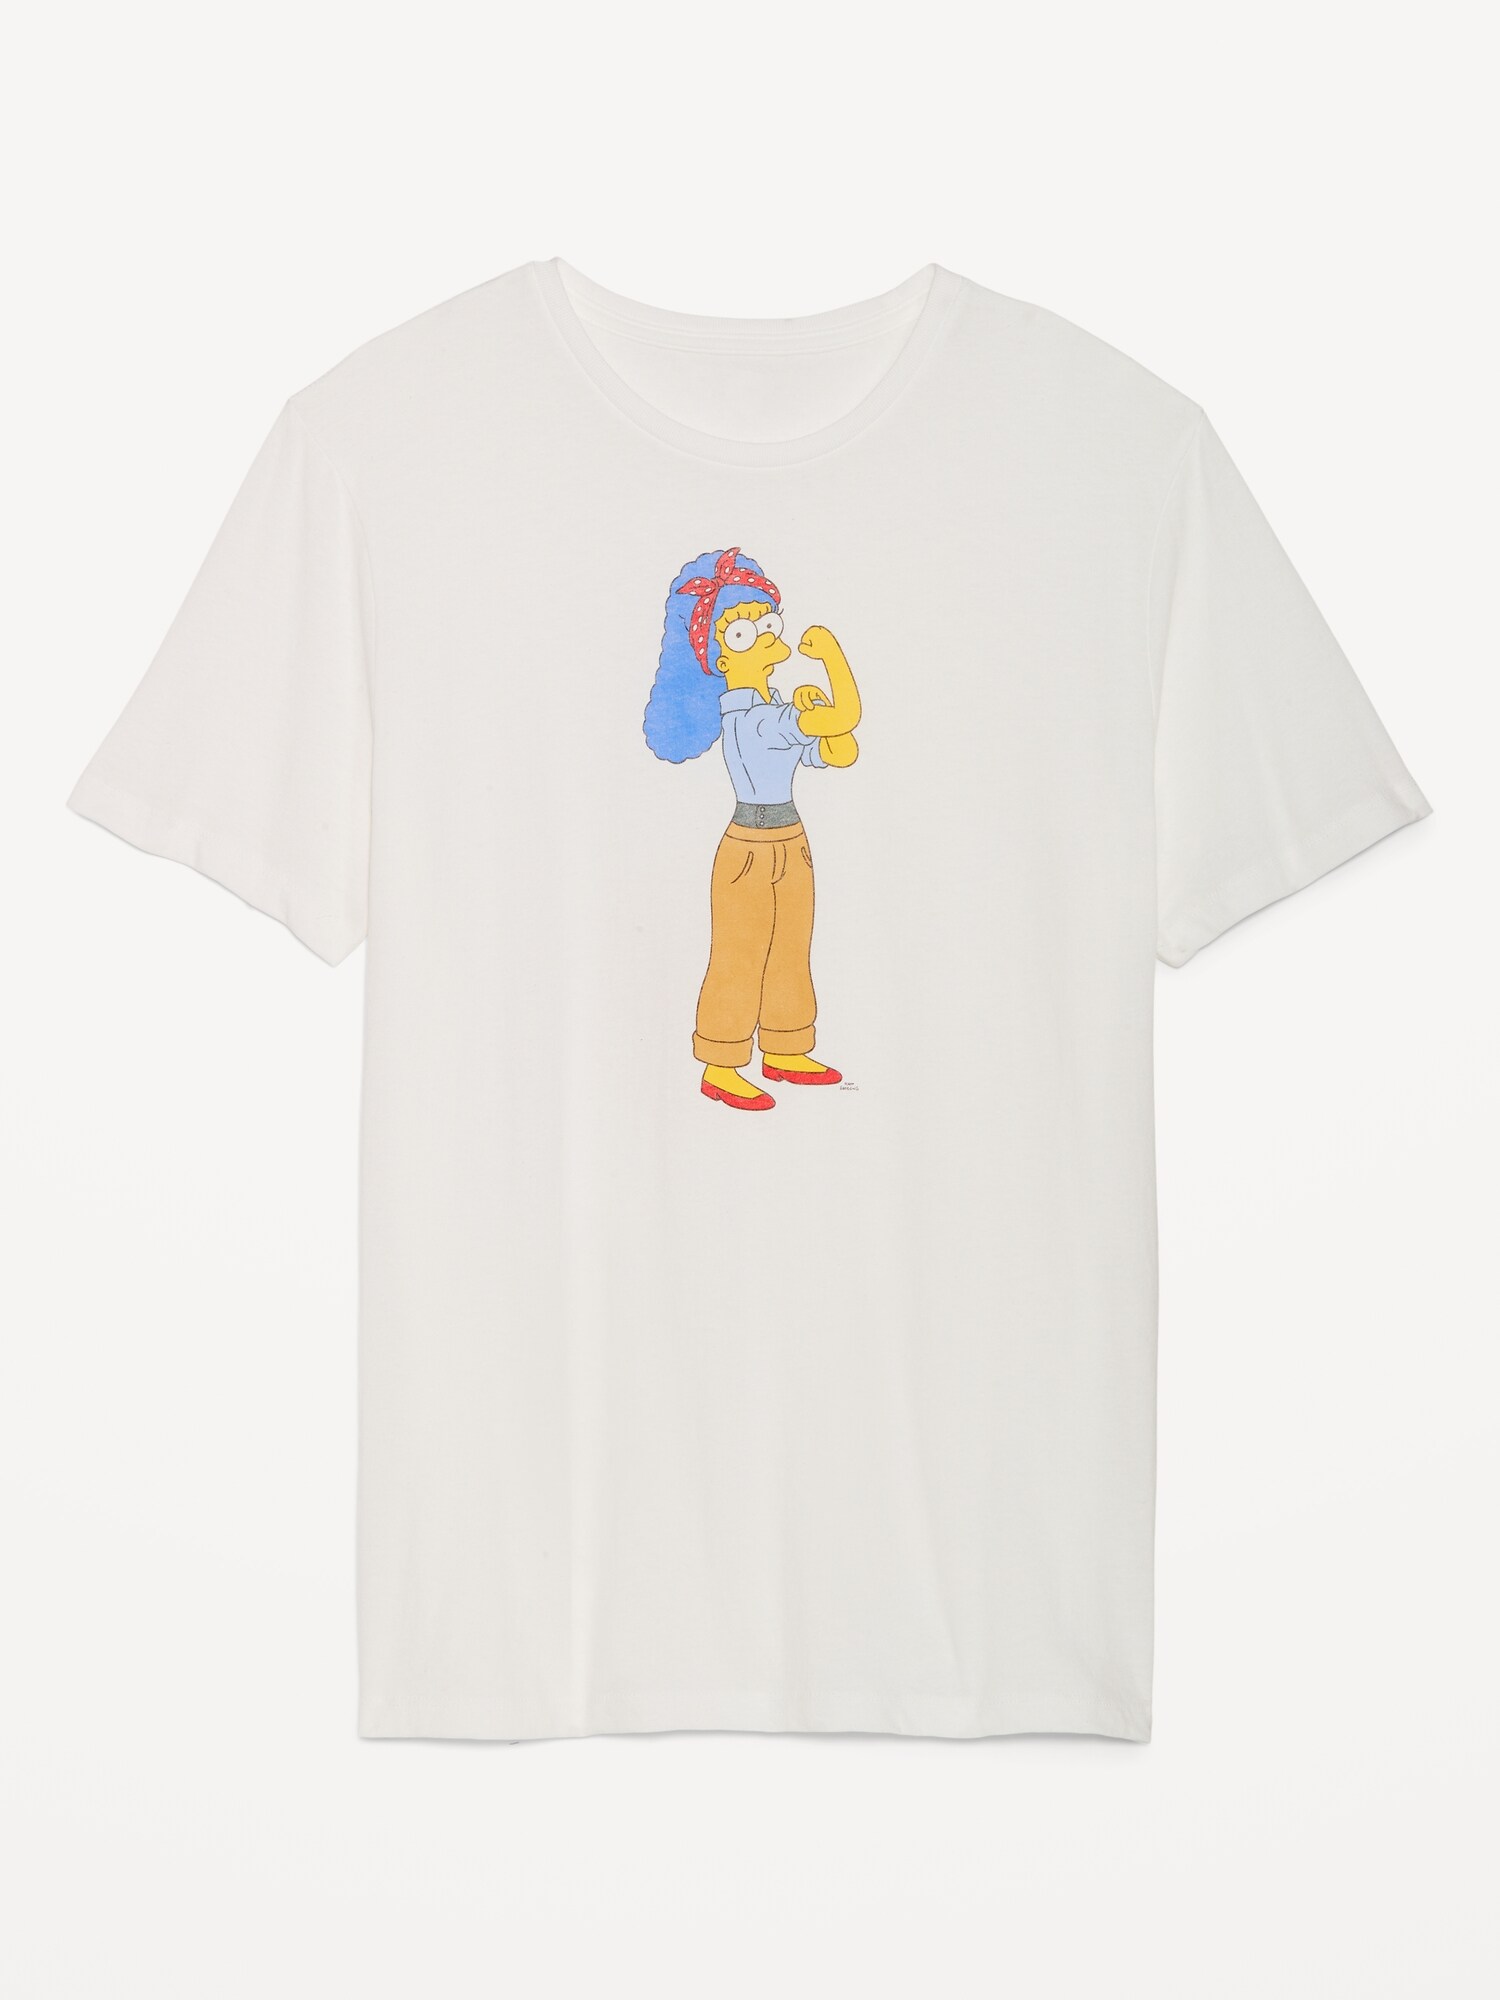 The Simpsons™ Gender-Neutral T-Shirt for Adults | Old Navy